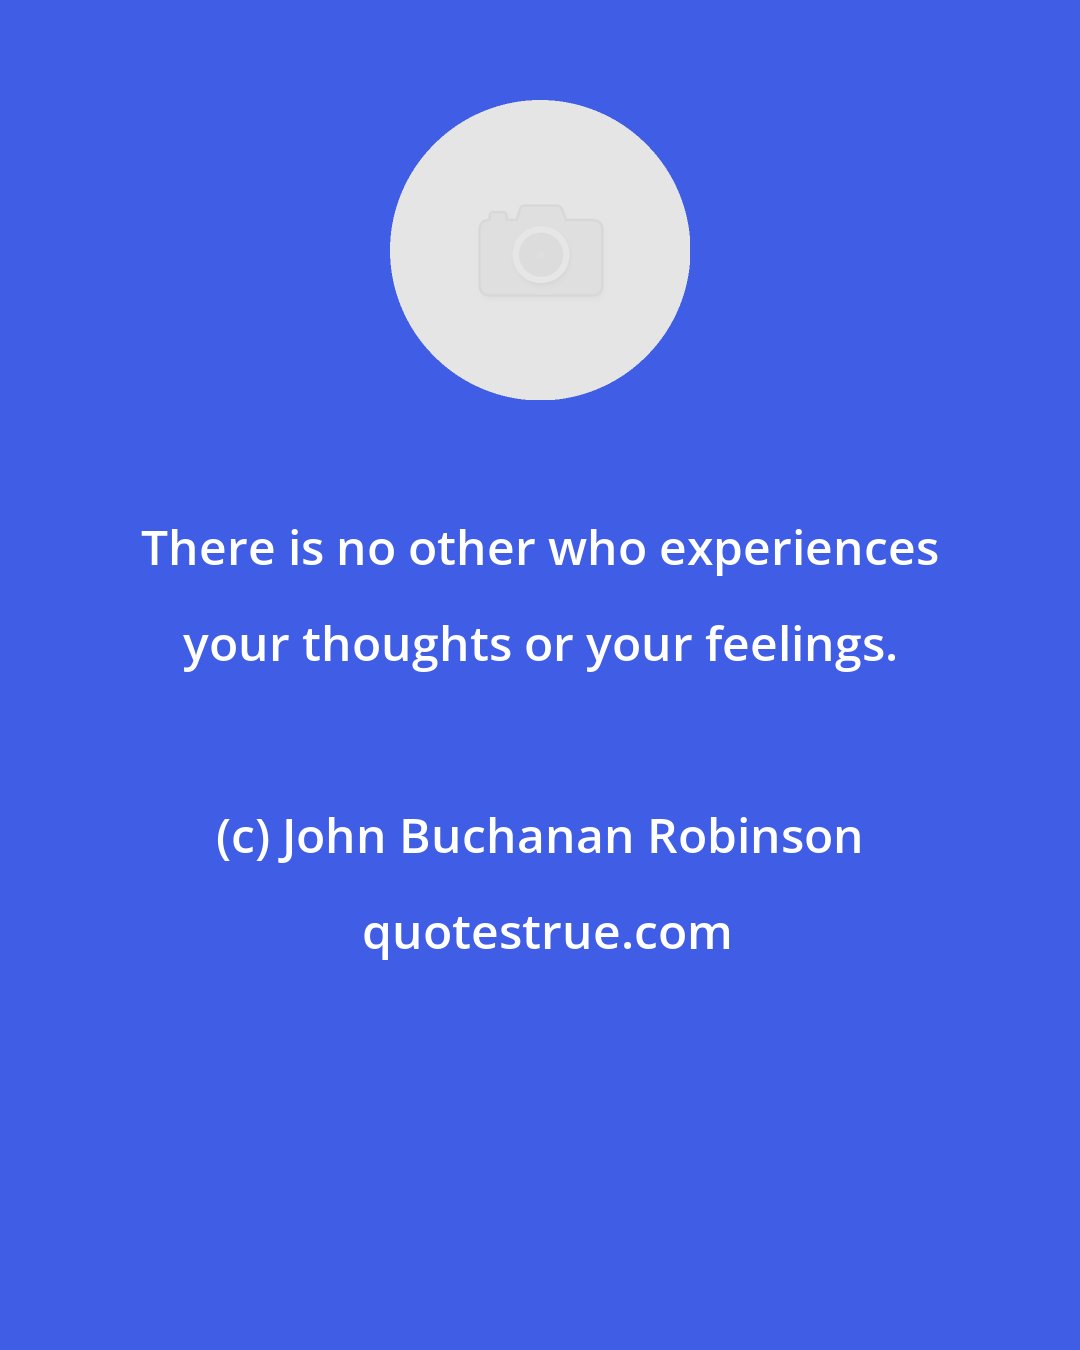 John Buchanan Robinson: There is no other who experiences your thoughts or your feelings.